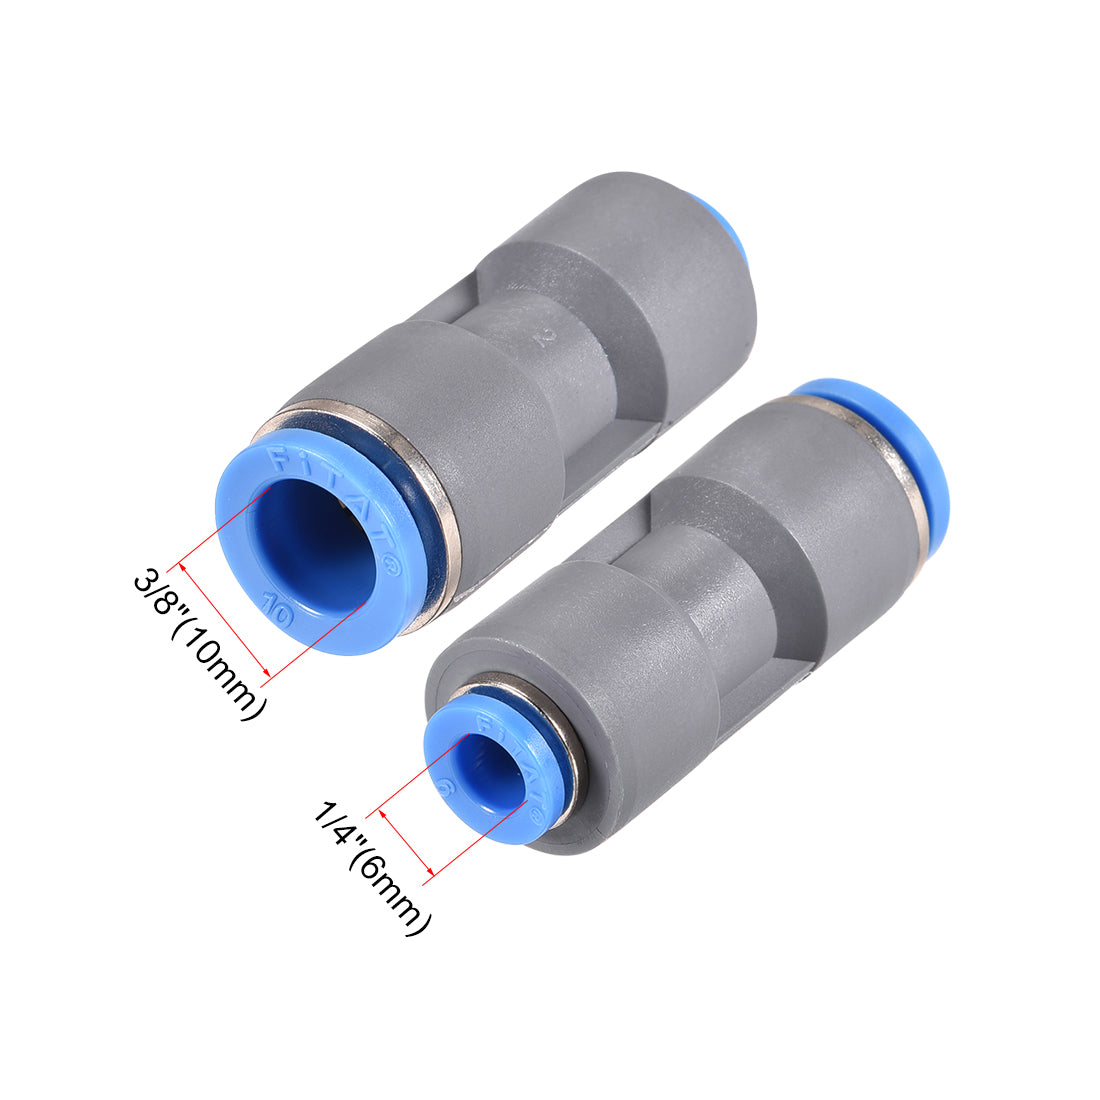 uxcell Uxcell Straight Push to Connector Reducer Fitting 10mm to 6mm Plastic Union Pipe Tube Fitting Grey 5Pcs